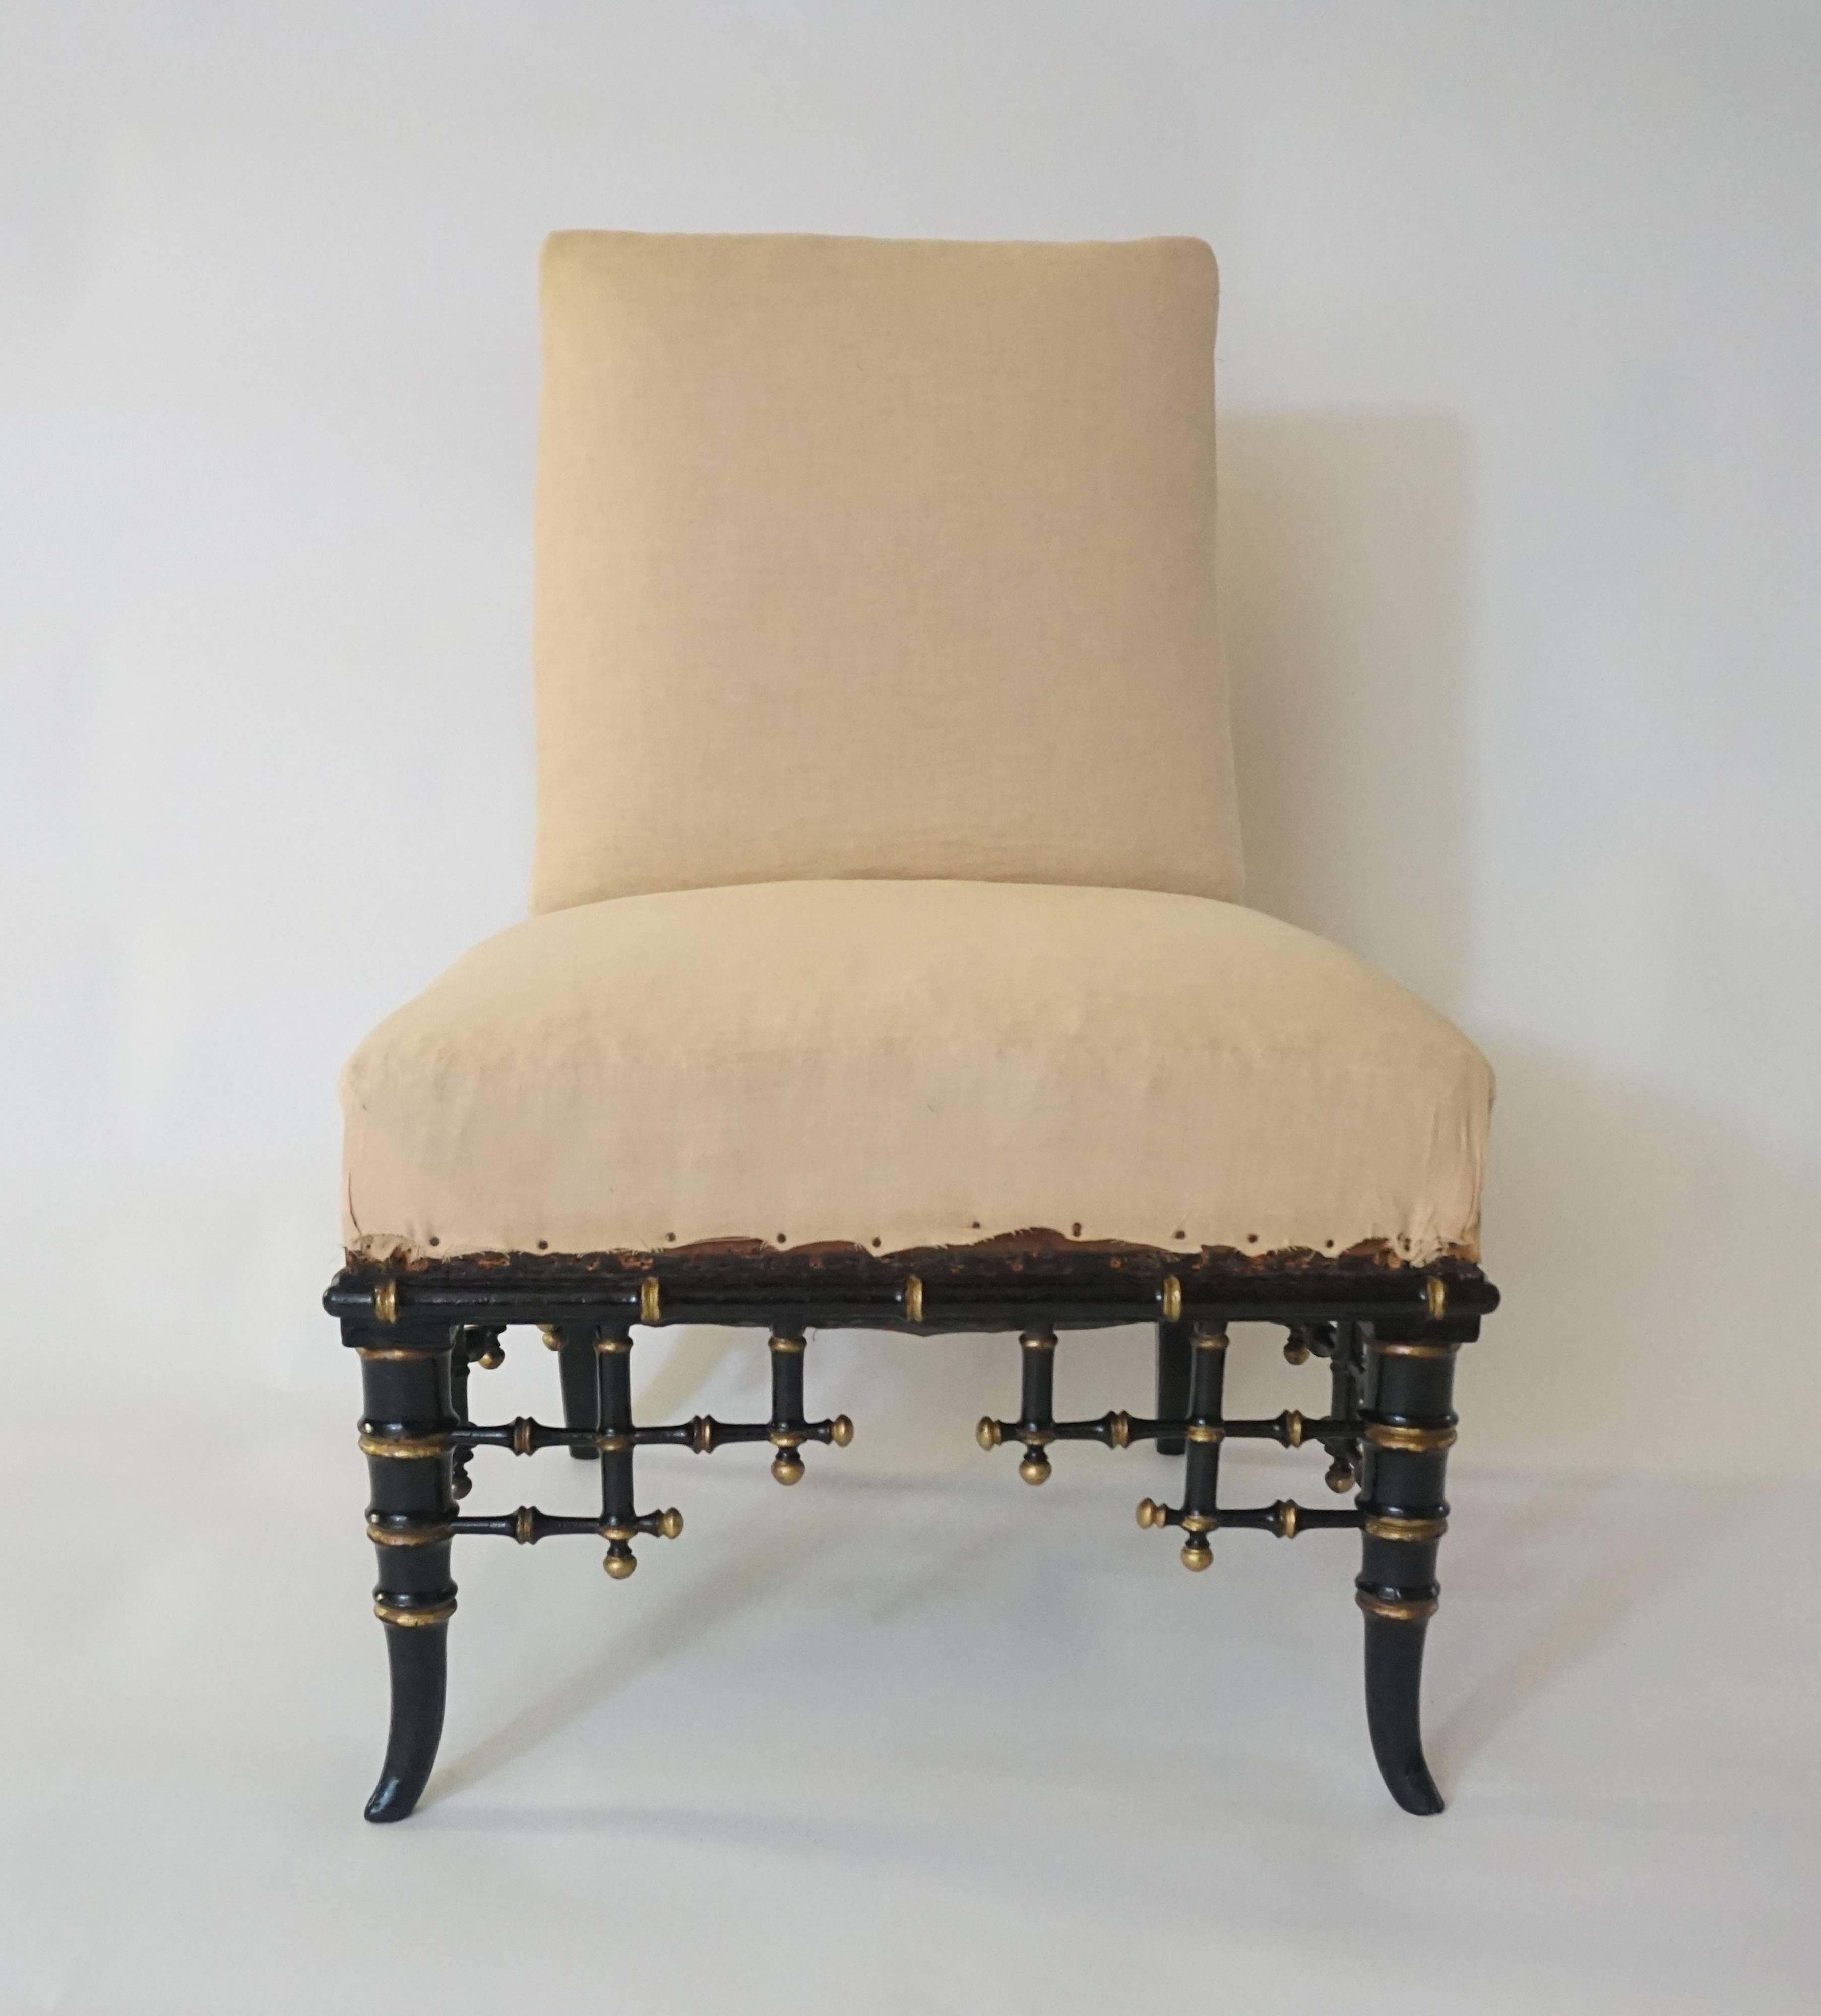 French, Napoleon III period, circa 1860, chinoiserie slipper chair having upholstered back and seat on ebonized and parcel-gilt carved wood fretwork frame.